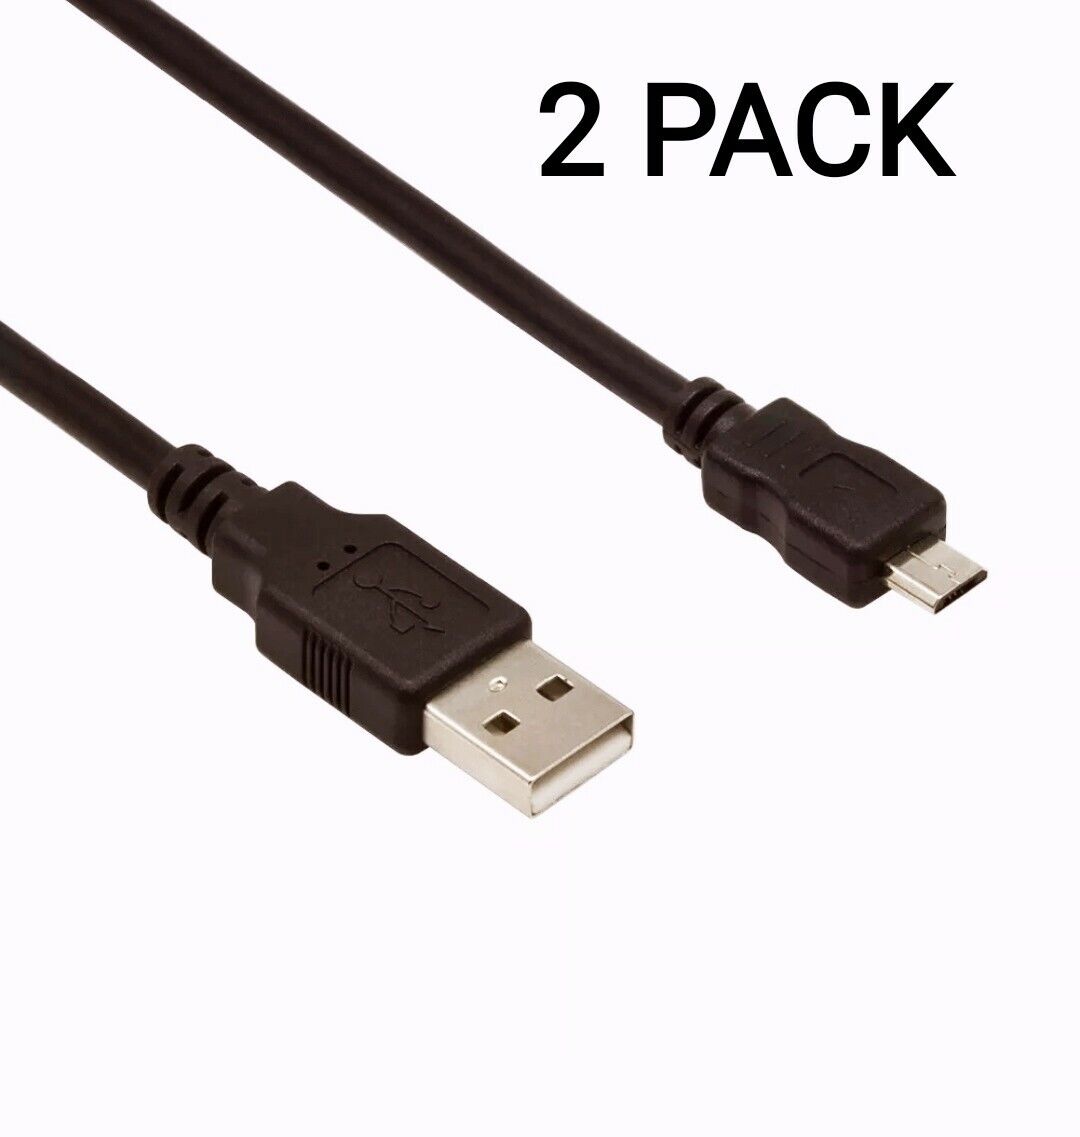 2 Pack 1Ft USB 2.0 A MALE TO MICRO B MALE CABLE BLACK COLOR